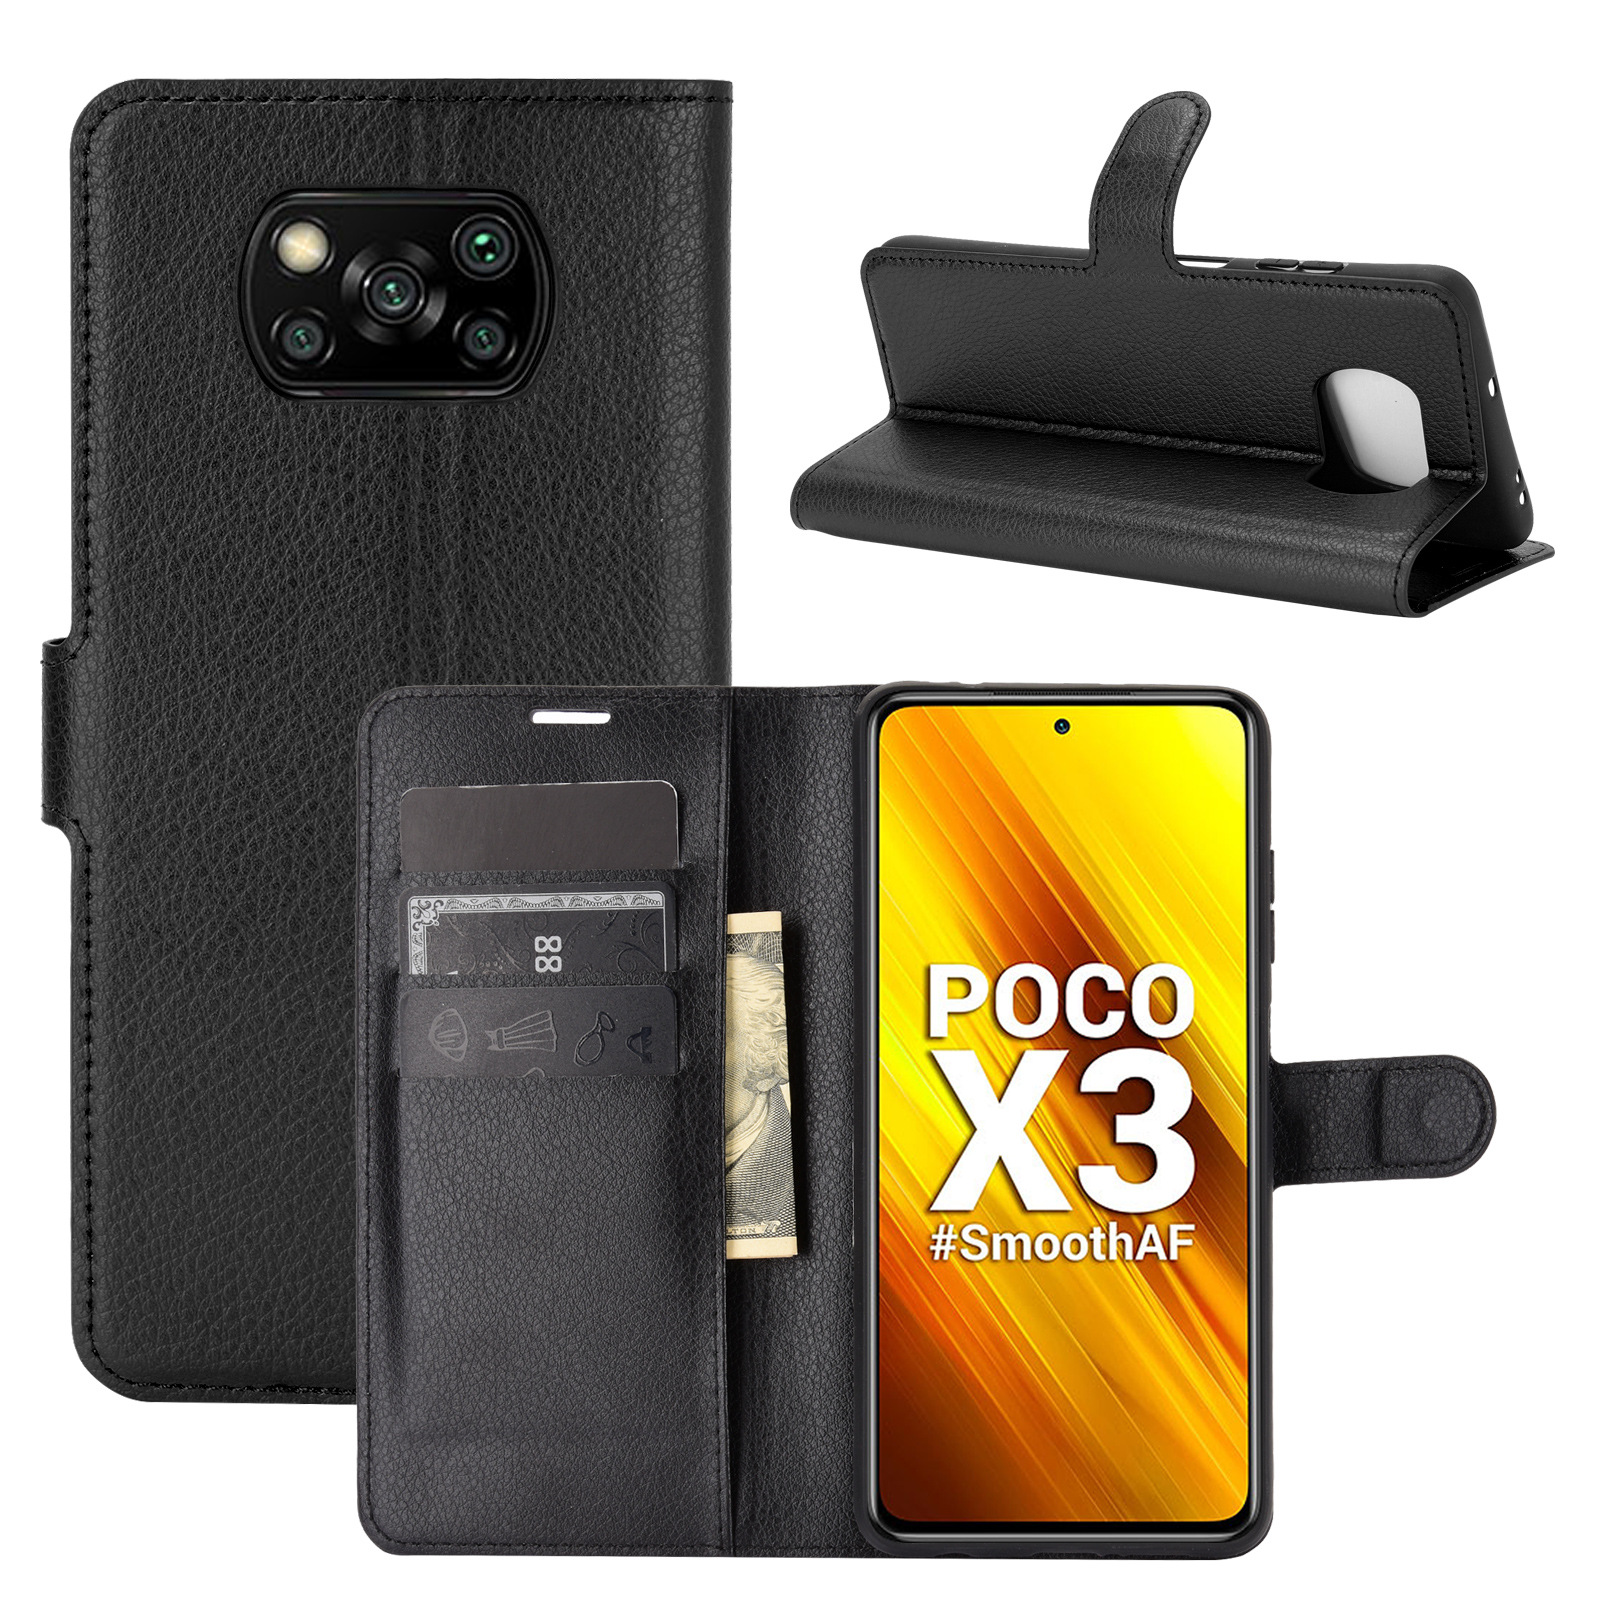 Bakeey-for-POCO-X3-PRO--POCO-X3-NFC-Case-Litchi-Pattern-Flip-Shockproof-PU-Leather-Full-Body-Protect-1847324-1